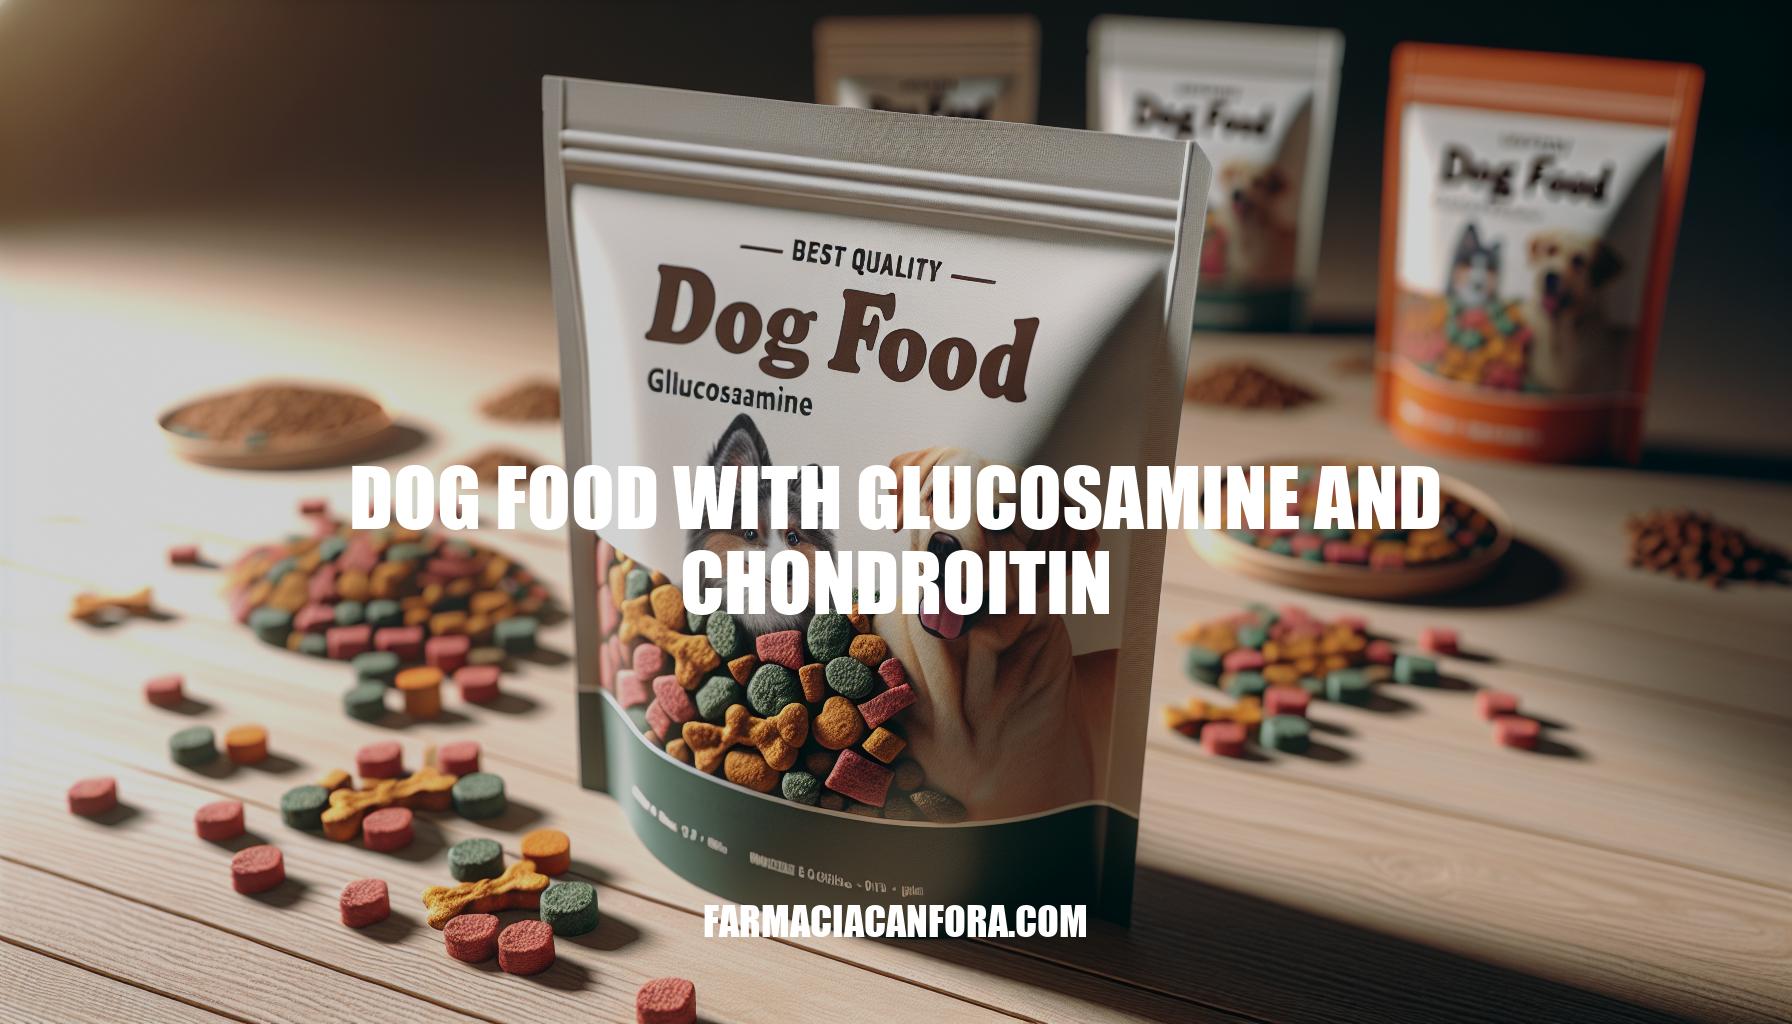 Best Dog Food with Glucosamine and Chondroitin